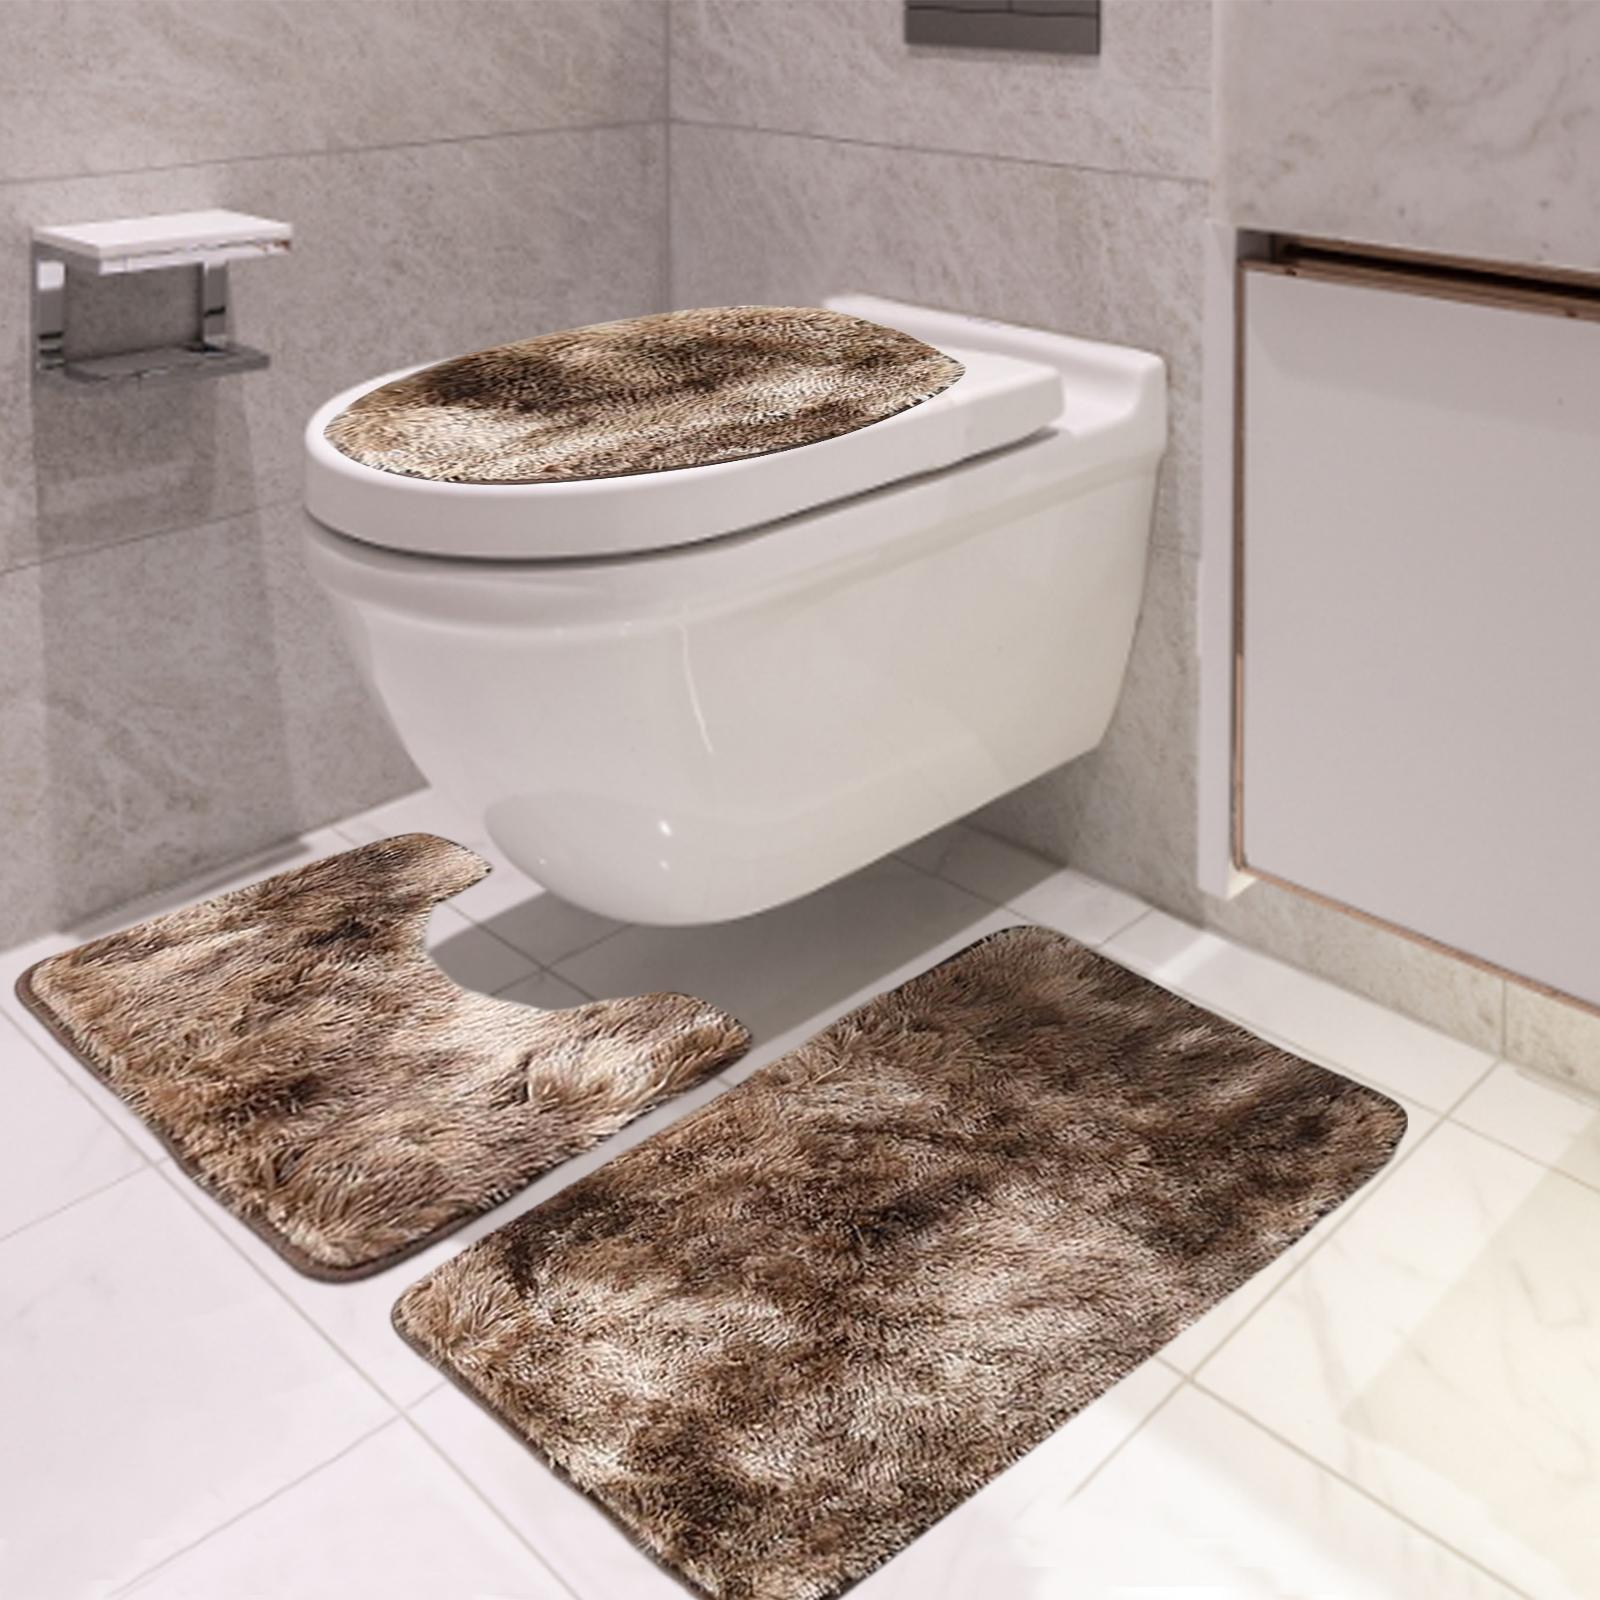 3x Bath Mats Set with Toilet Lid Cover Absorbent Large Carpet for Tub Brown